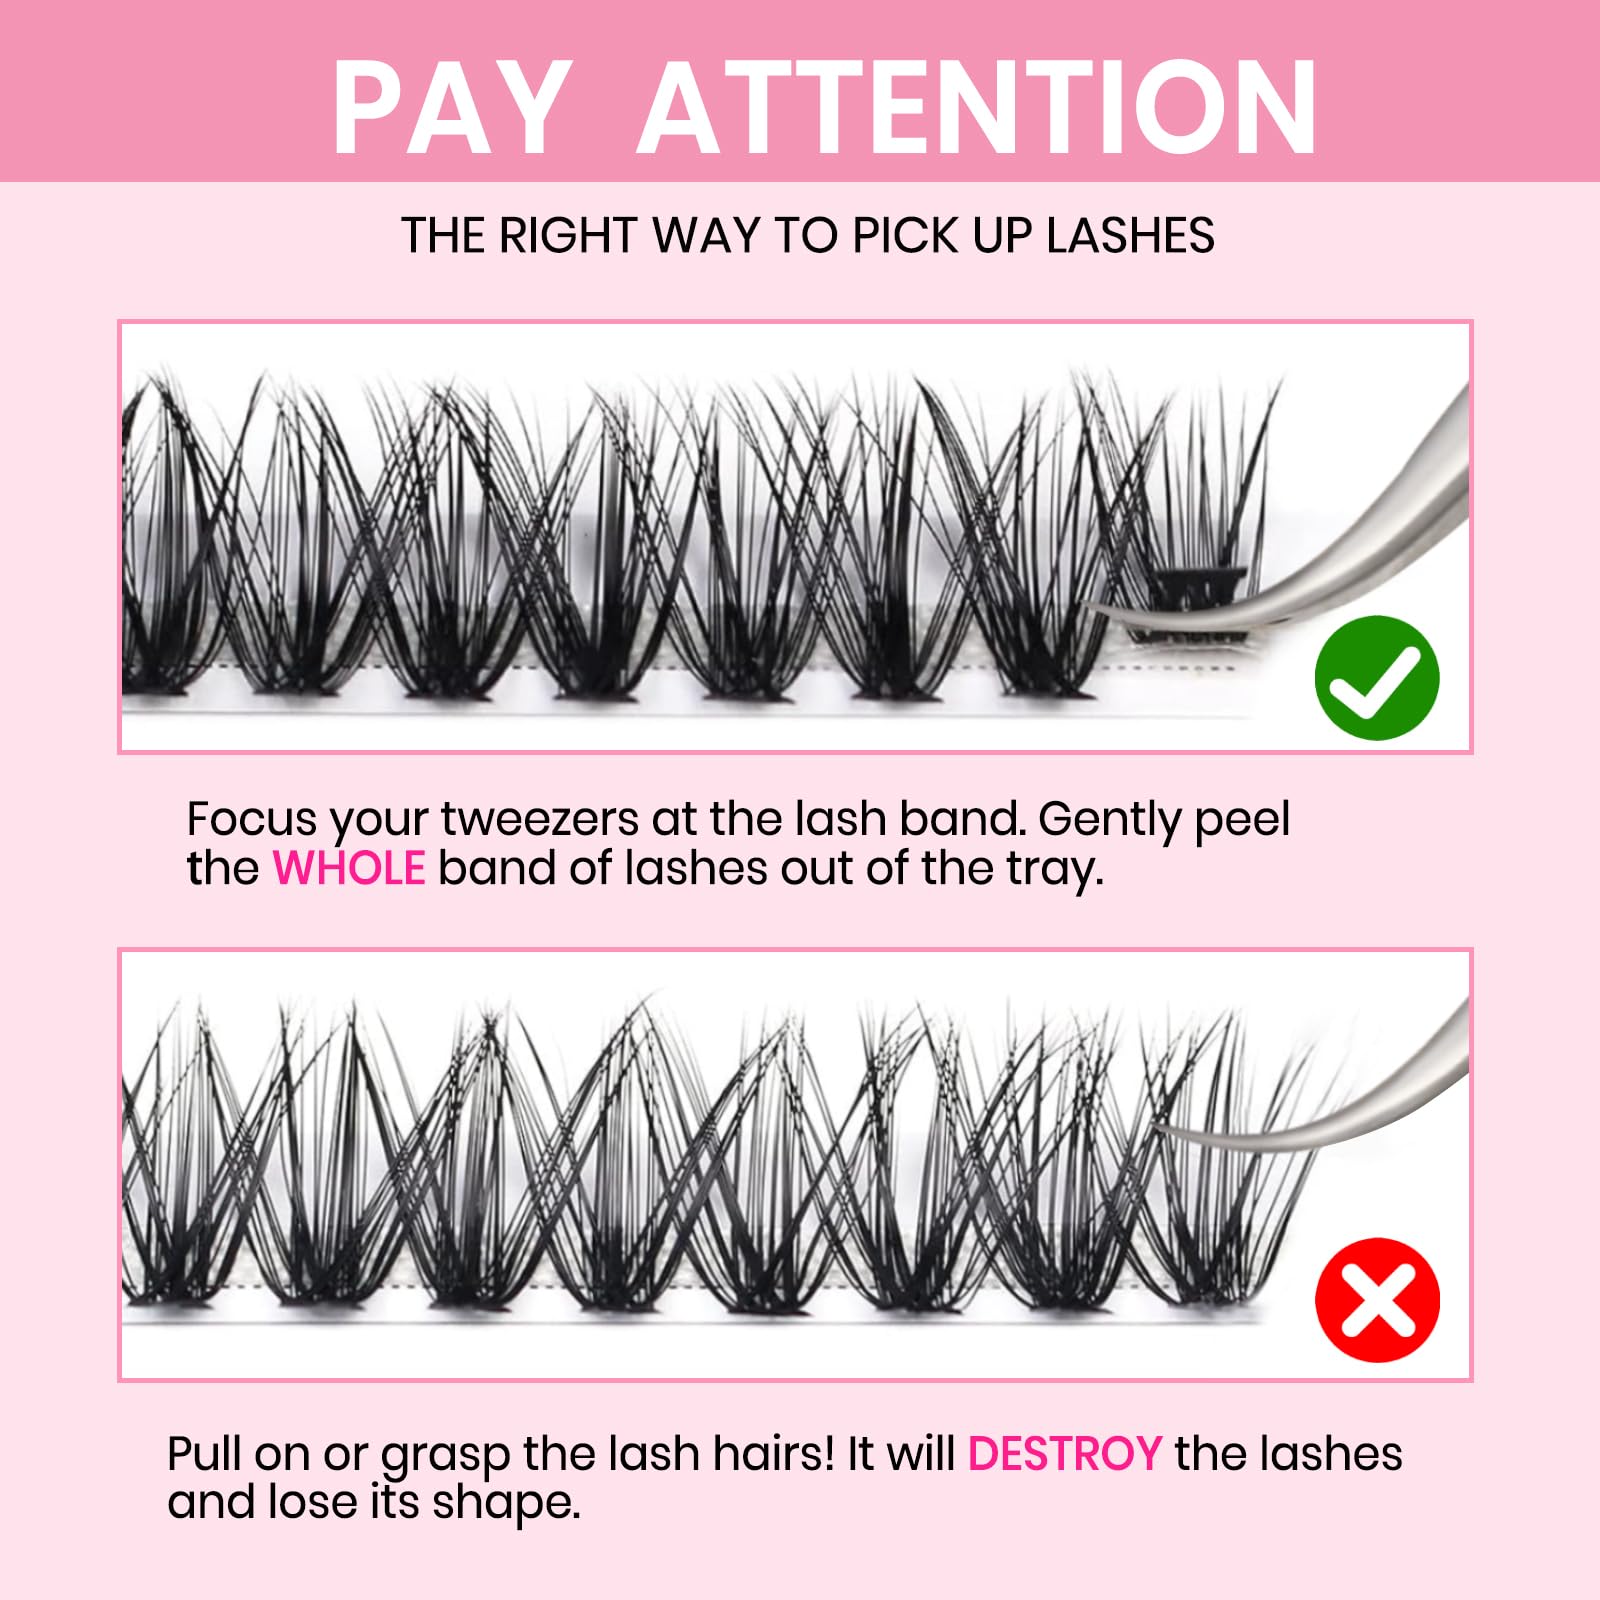 Lash Clusters 90PCS Individual Lashes, D Curl Lash Extension Clusters Lashes Wispy Natural Look, DIY Eyelash Clusters Volume Look Like Eyelash Extensions DIY at Home by STHANA- IRIS, 9-16mm Mixed